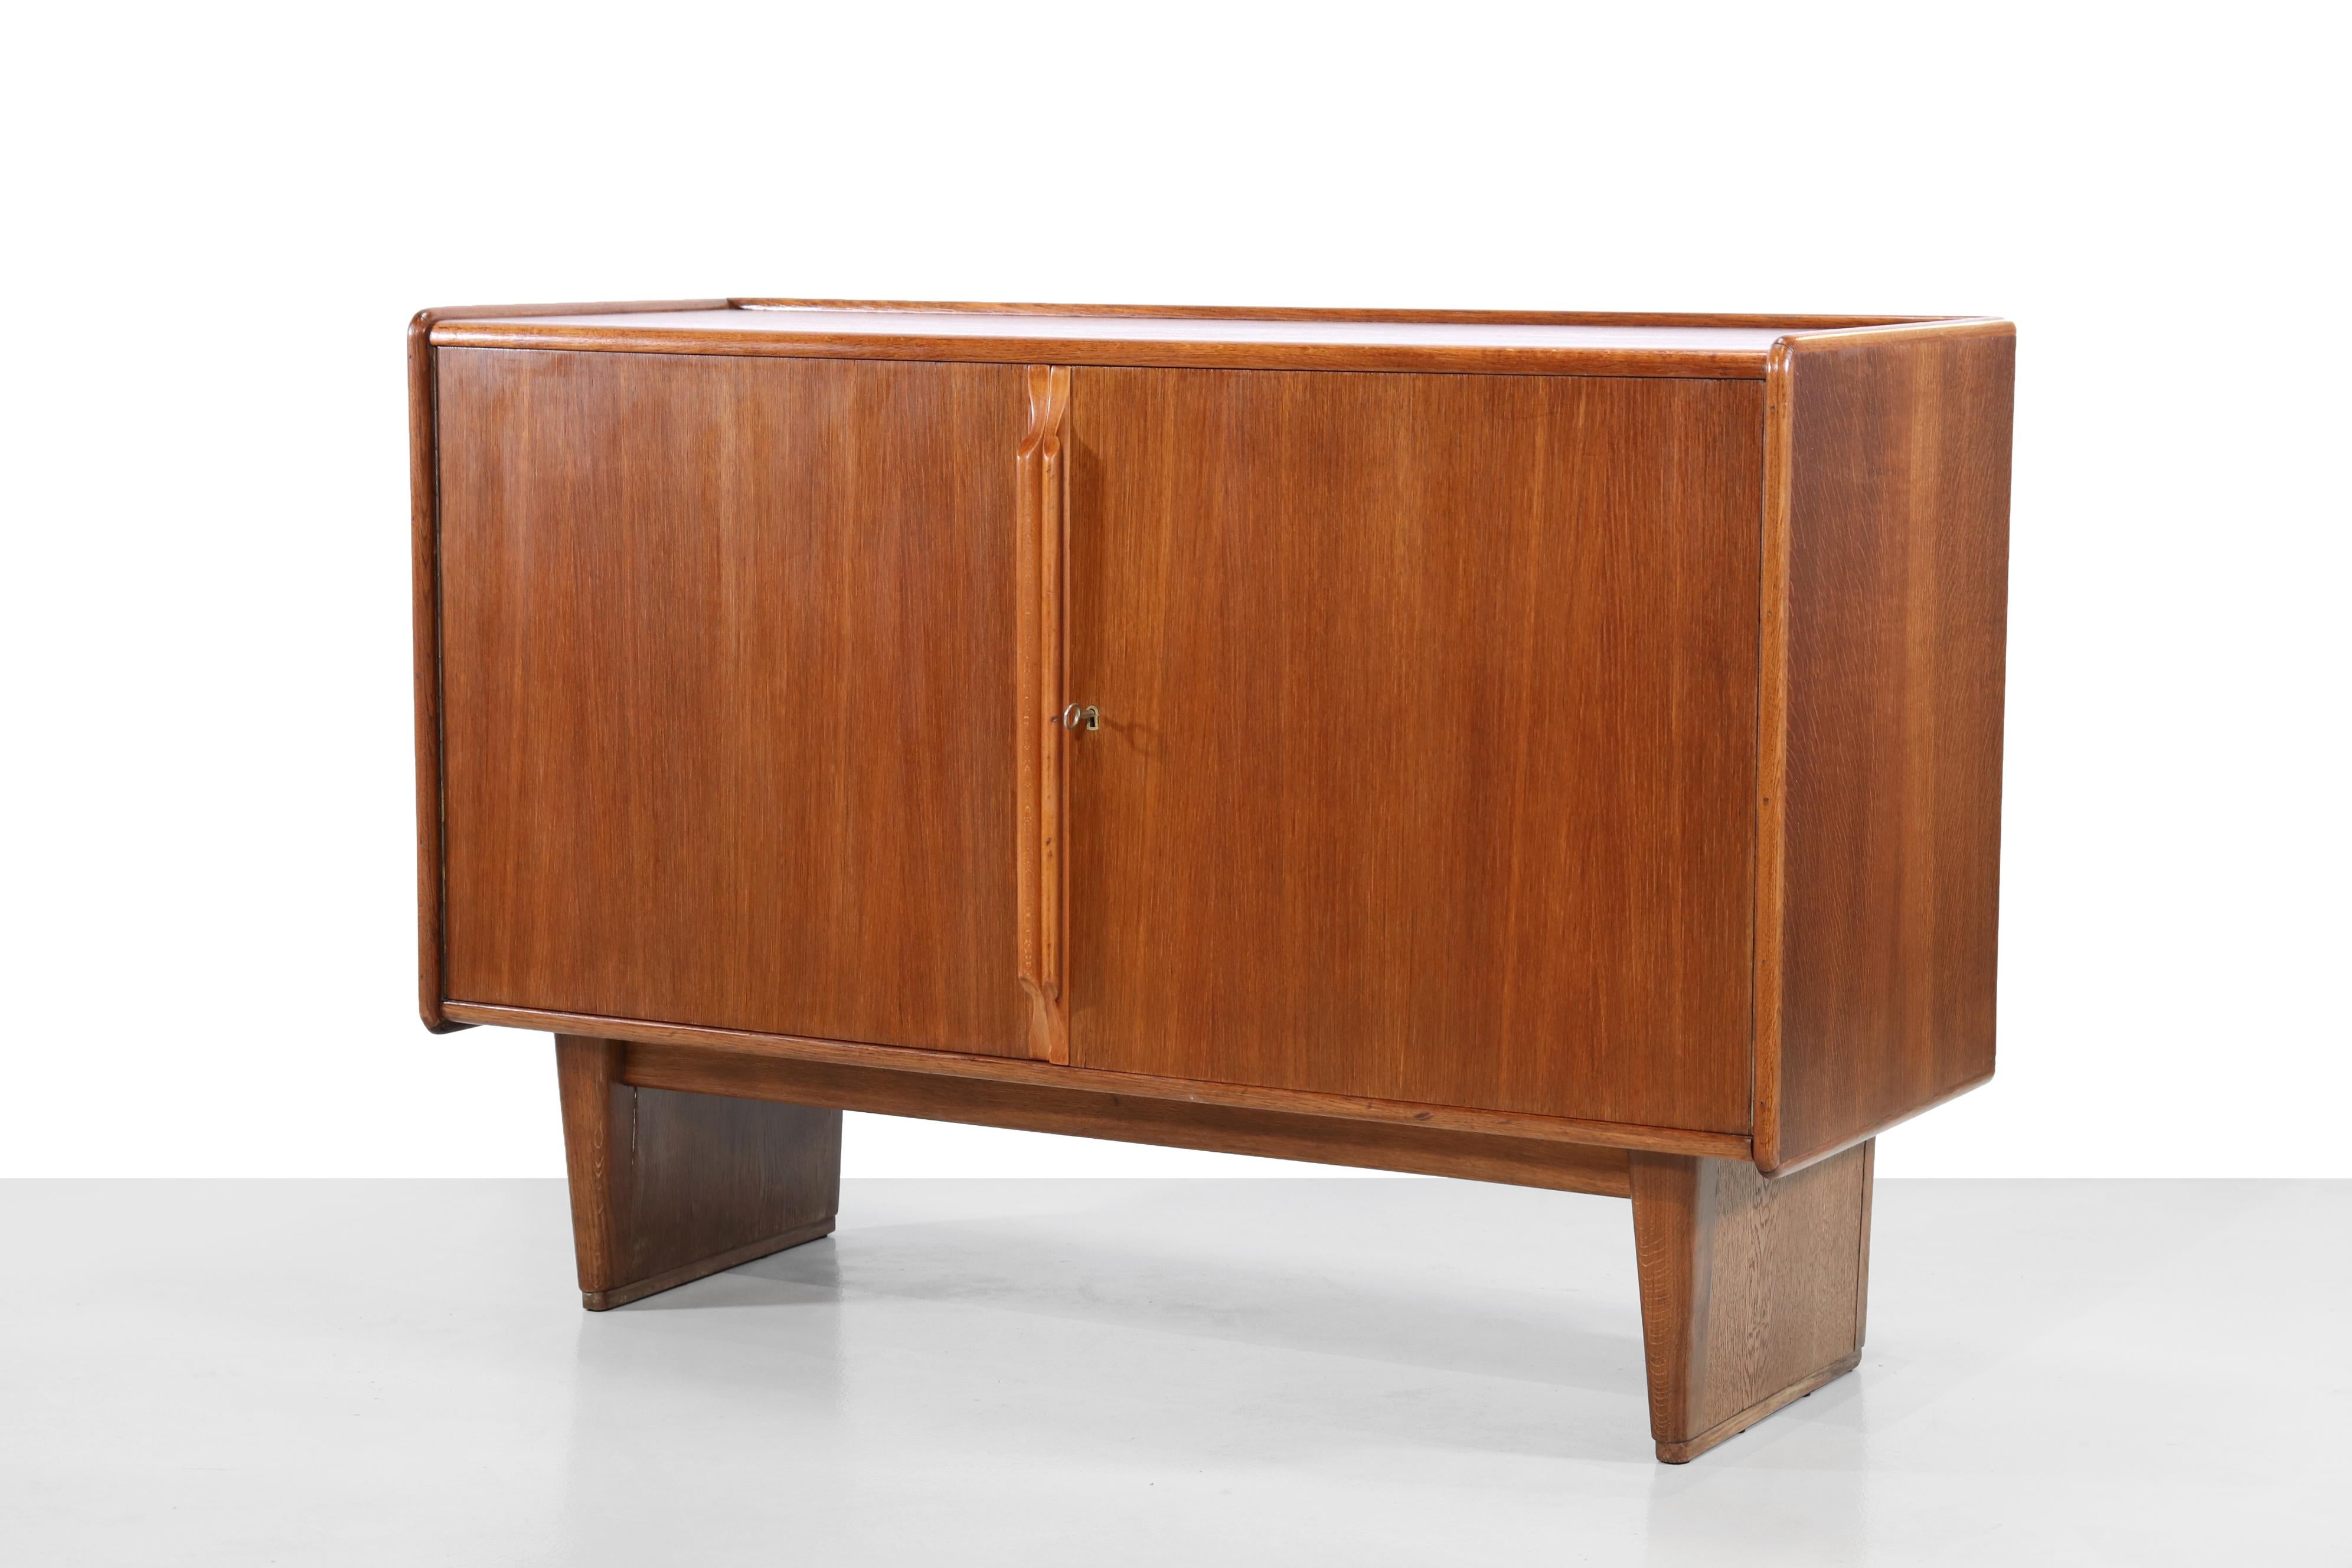 Rare and hard to find model DE01 cabinet by Cees Braakman for Pastoe from the early 1950s, is this model with the two doors. Most likely commissioned as it was at the time. This sideboard from the so-called oak series by Cees Braakman stands on two